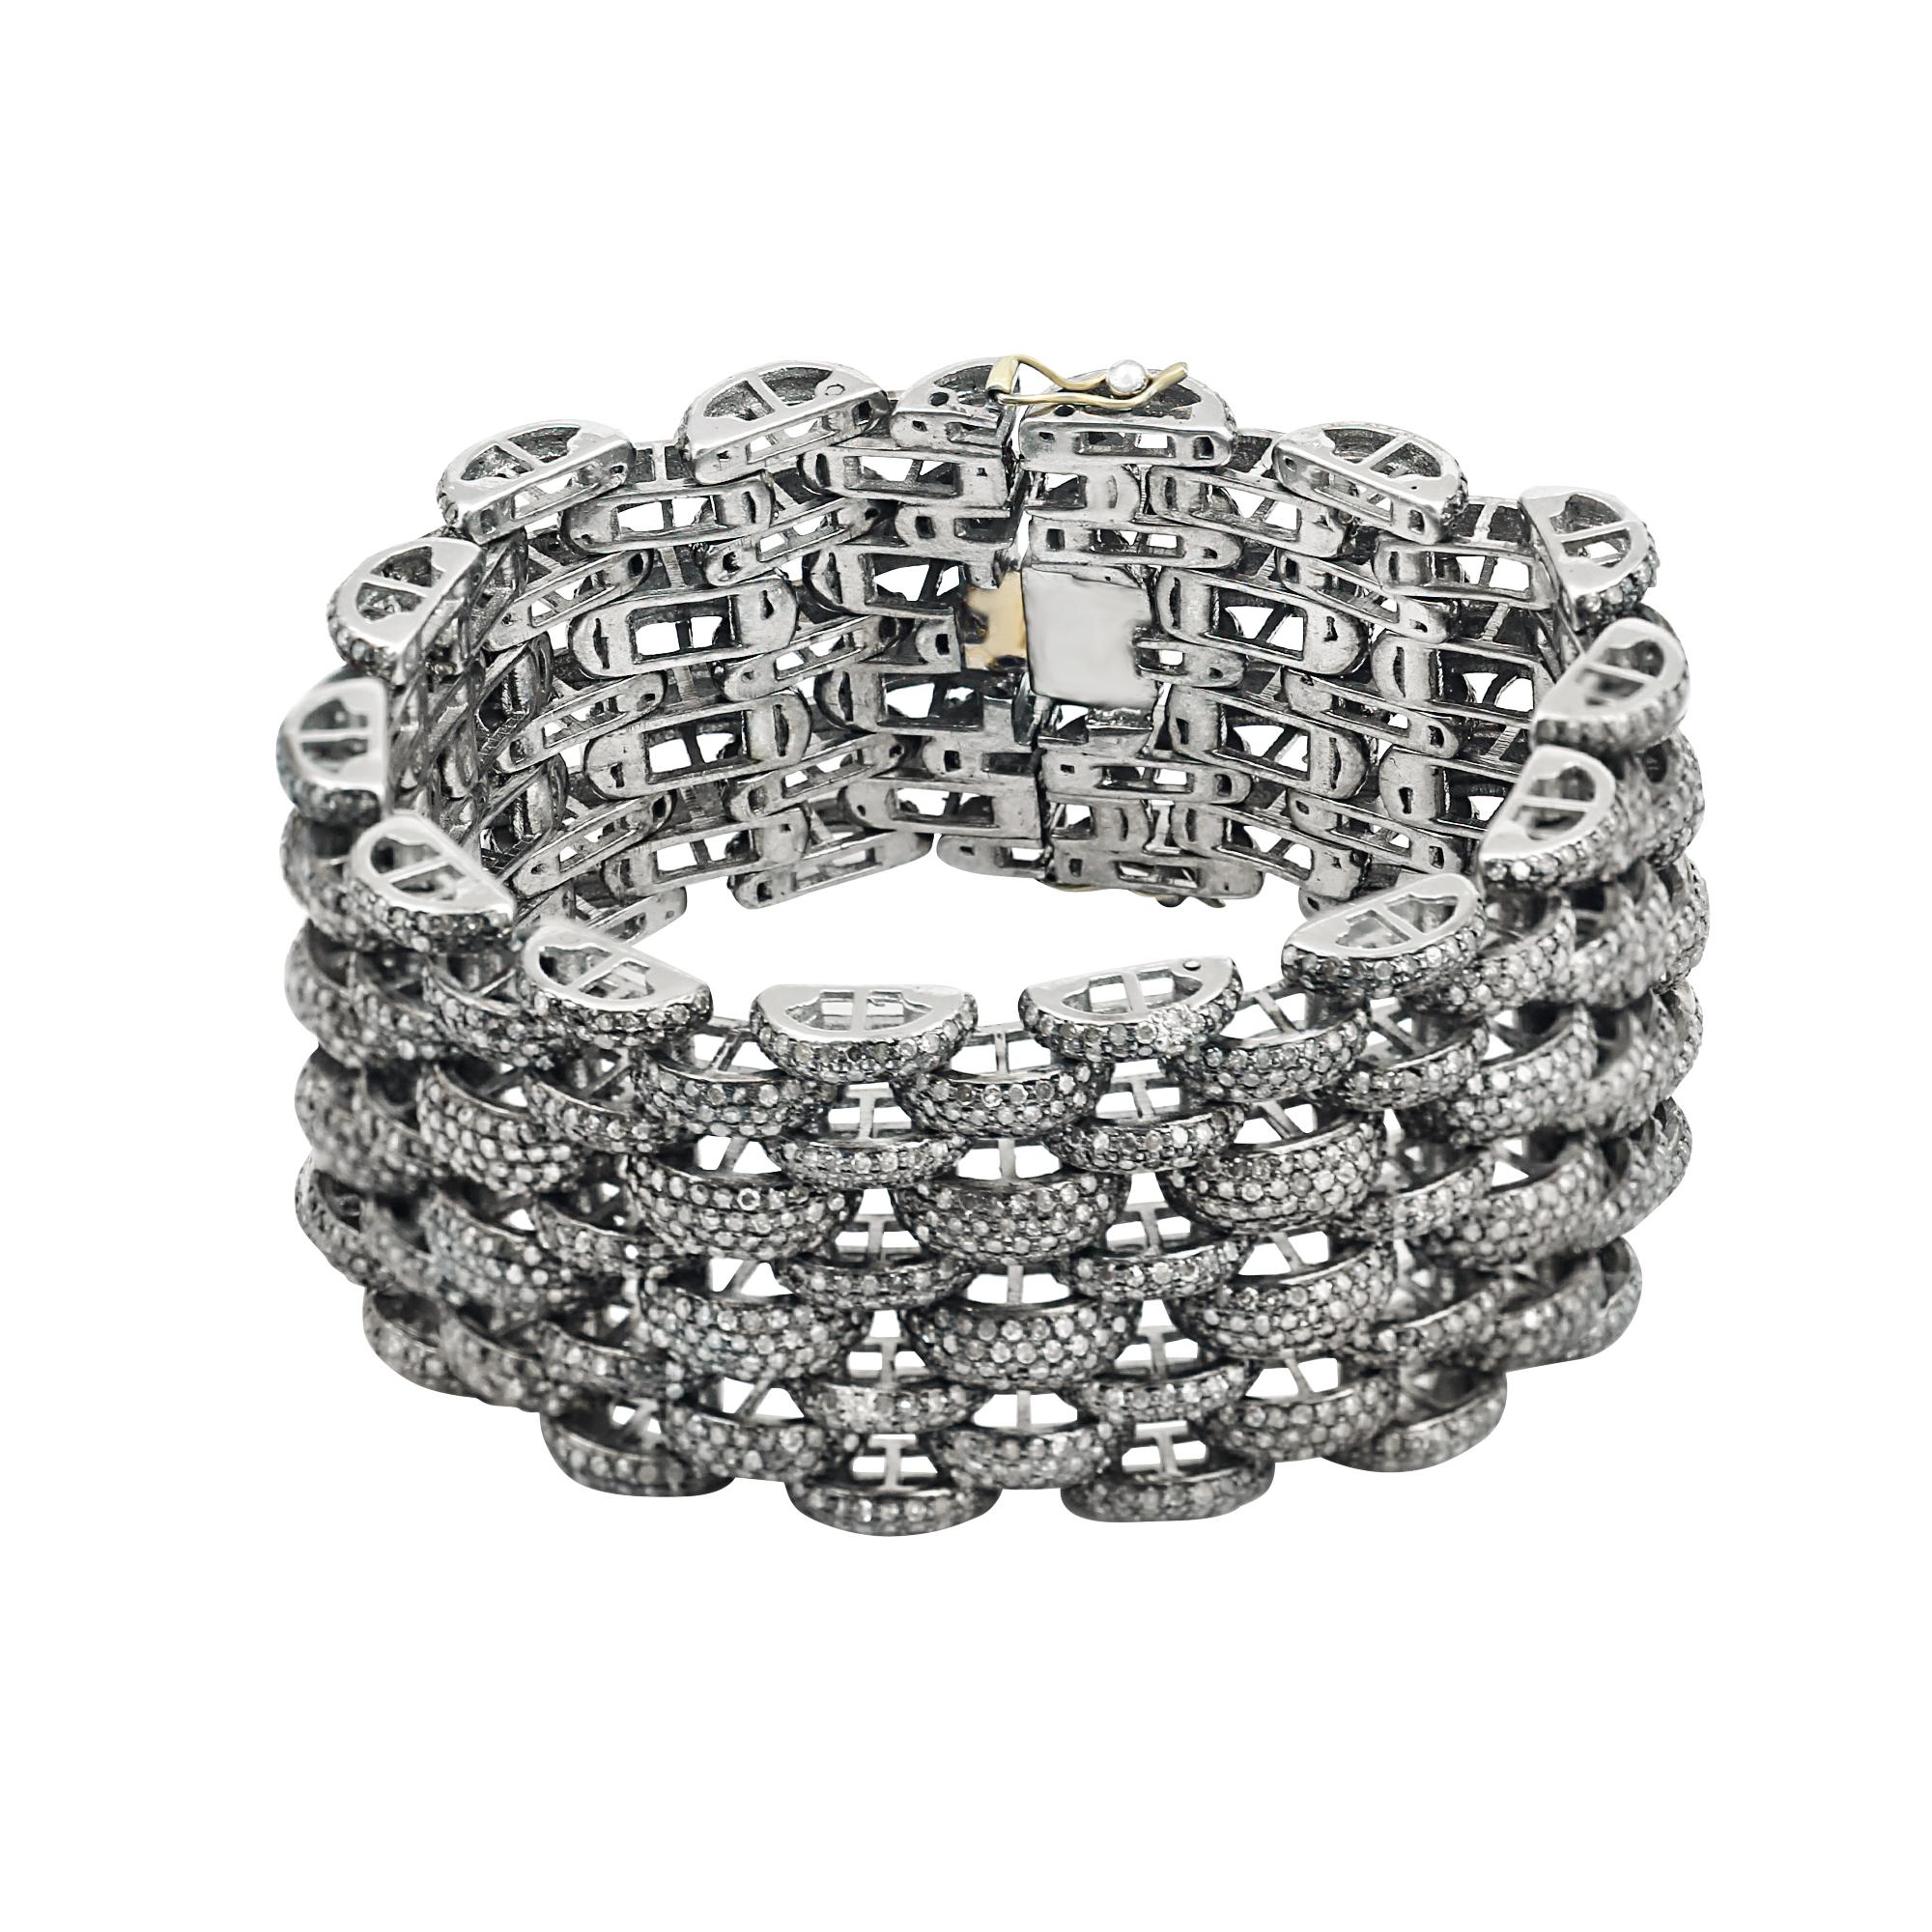 Very Beautiful one of a kind artisan made designer 18 carats Diamond bracelet. Designed and handmade with precision, Perfect craftsmanship, and strong interest!